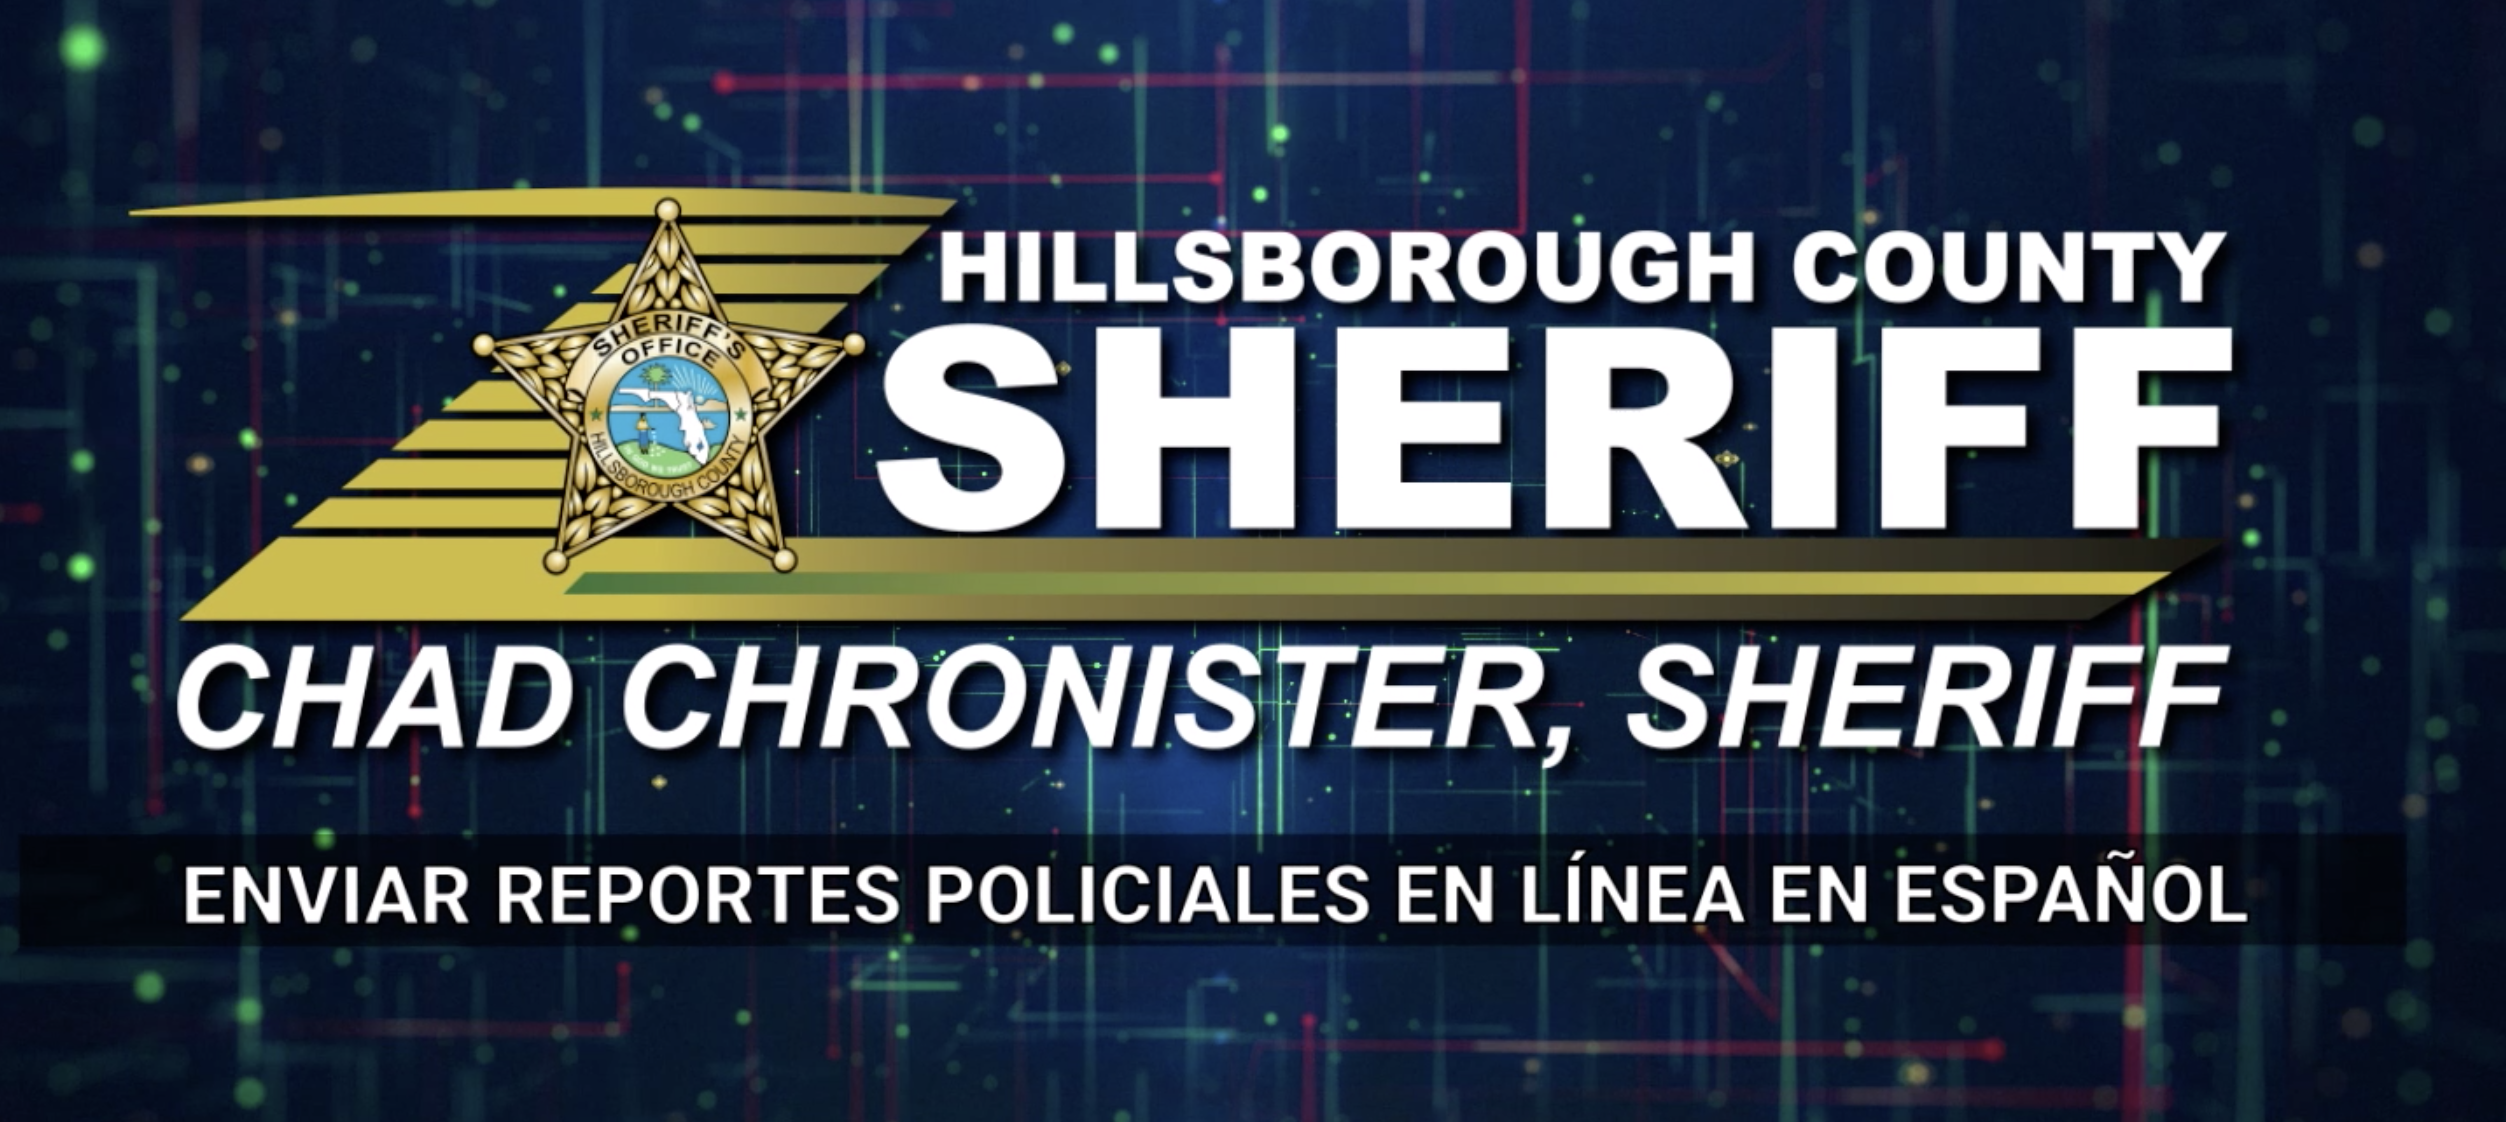 HCSO Spanish Online Citizen Reporting Goes LIVE